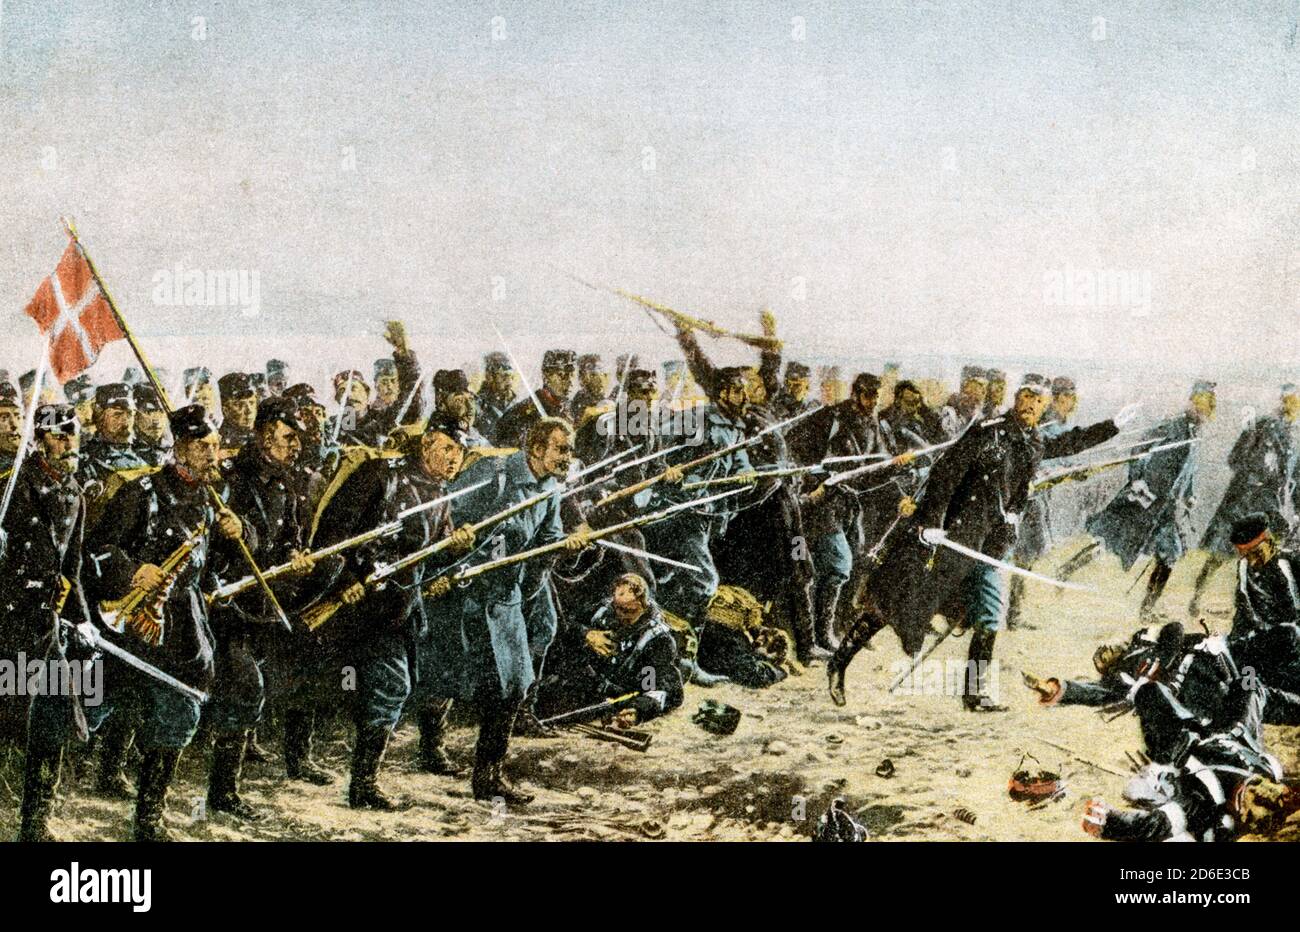 Brigade attack at Dybbol on April 18 1864 after painting by Vilhelm Rosendtand The Battle of Dybbøl was the key battle of the Second Schleswig War, fought between Denmark and Prussia. The battle was fought on the morning of 18 April 1864, following a siege that began on 7 April. Denmark suffered a severe defeat which ultimately decided the outcome of the war. Vilhelm Jacob Rosenstand (1838 –1915) was a Danish painter and illustrator. His best known work is a mural decorating the banqueting hall in the University of Copenhagen He painted genre works from Denmark and the south of Europe as well Stock Photo